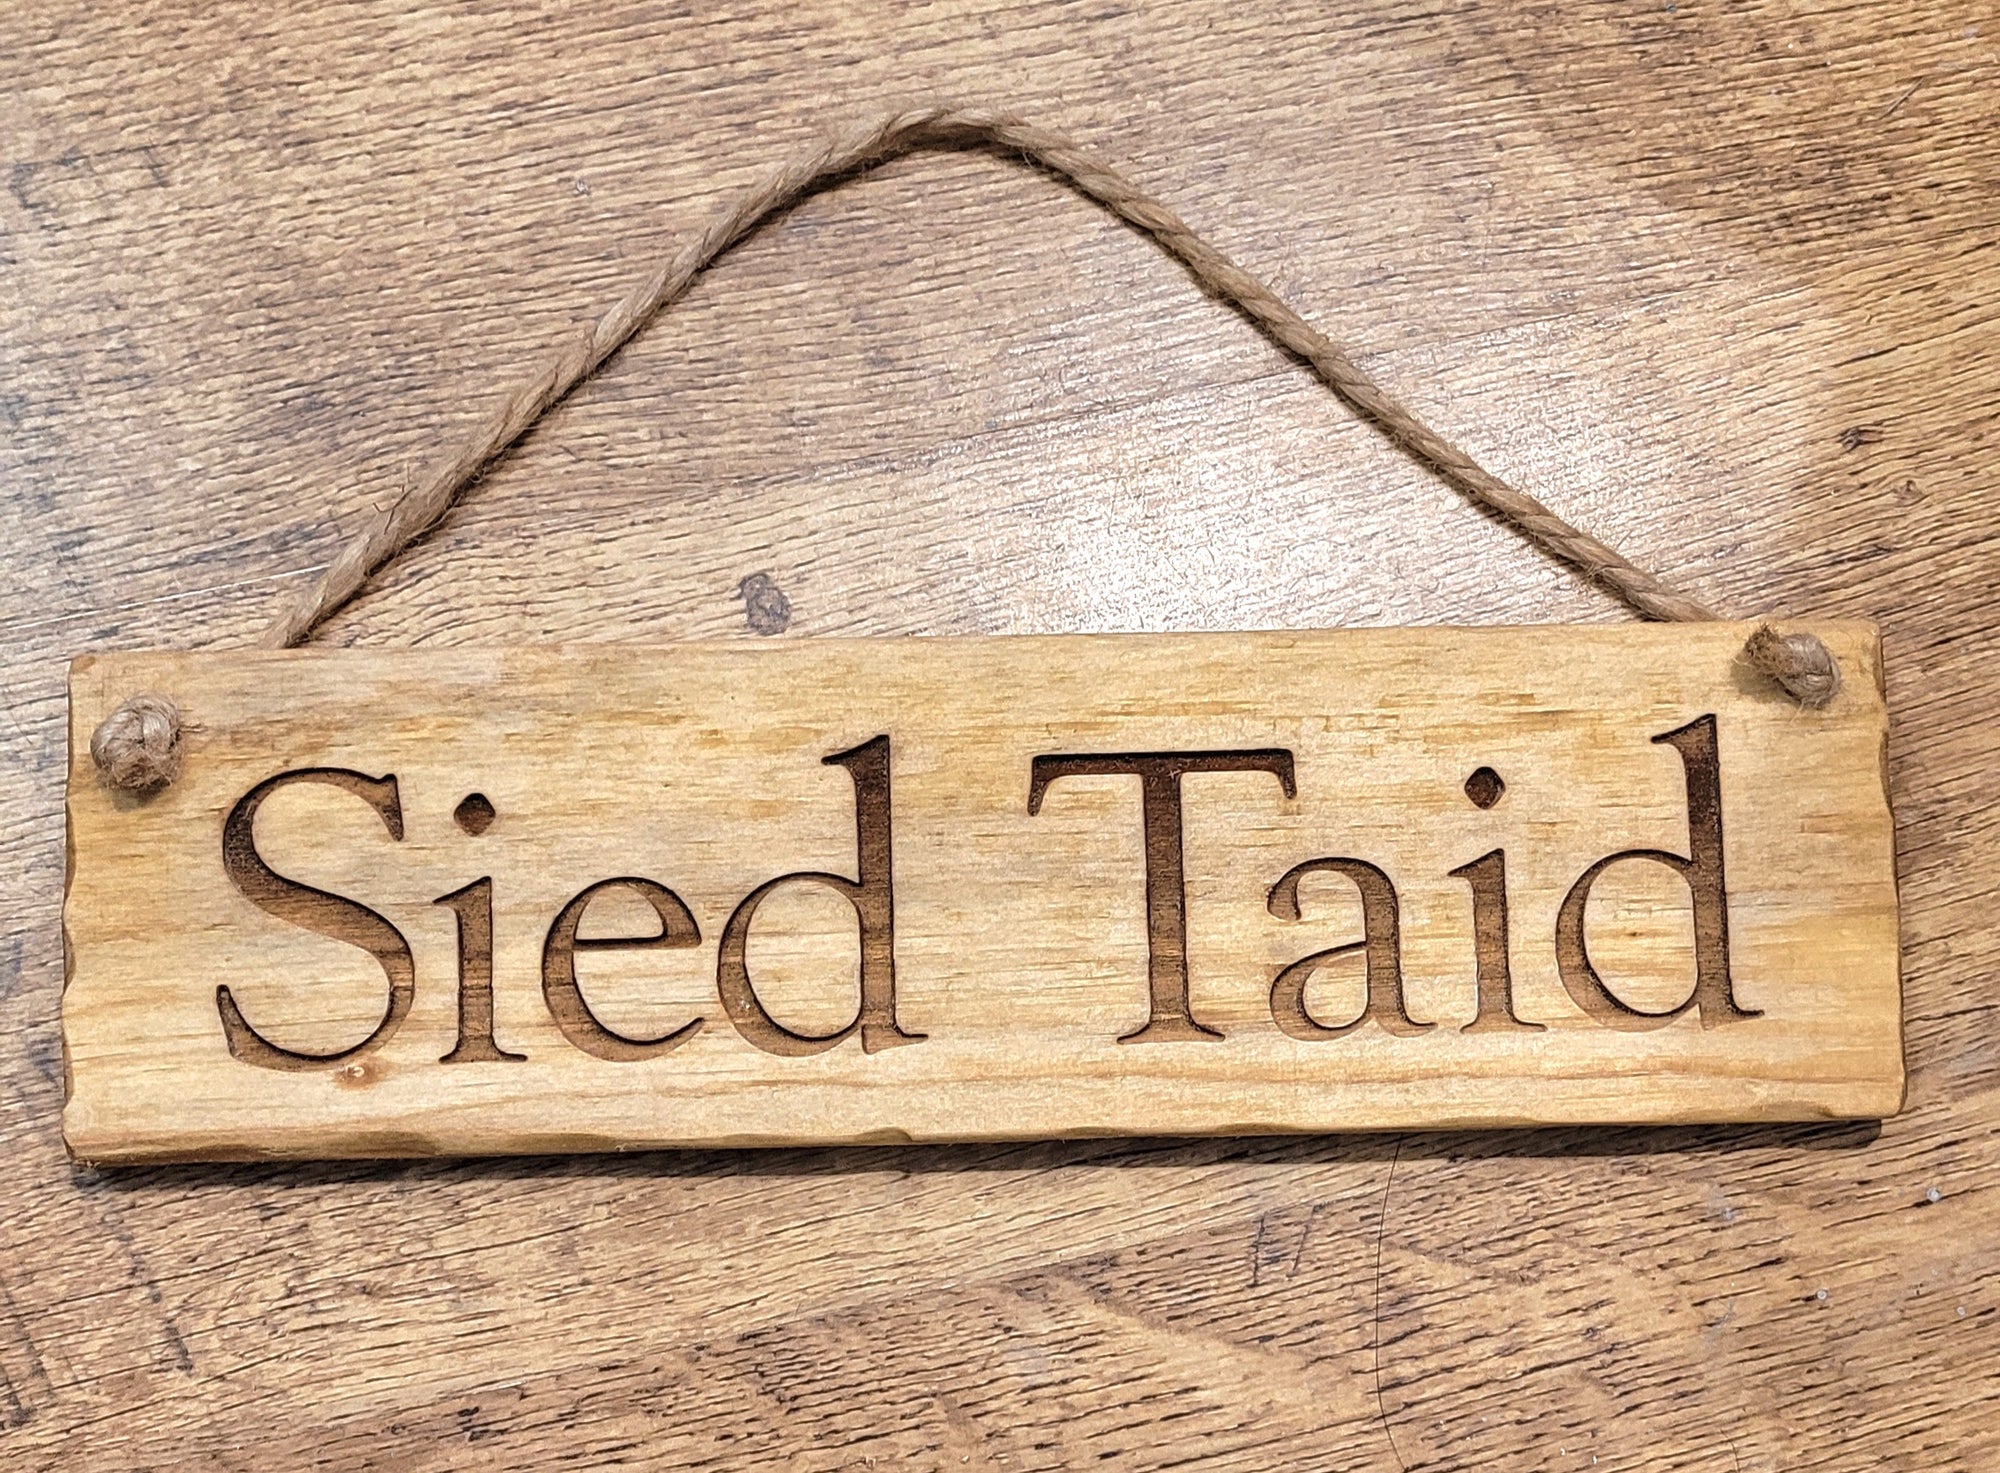 Sied Taid  wooden sign